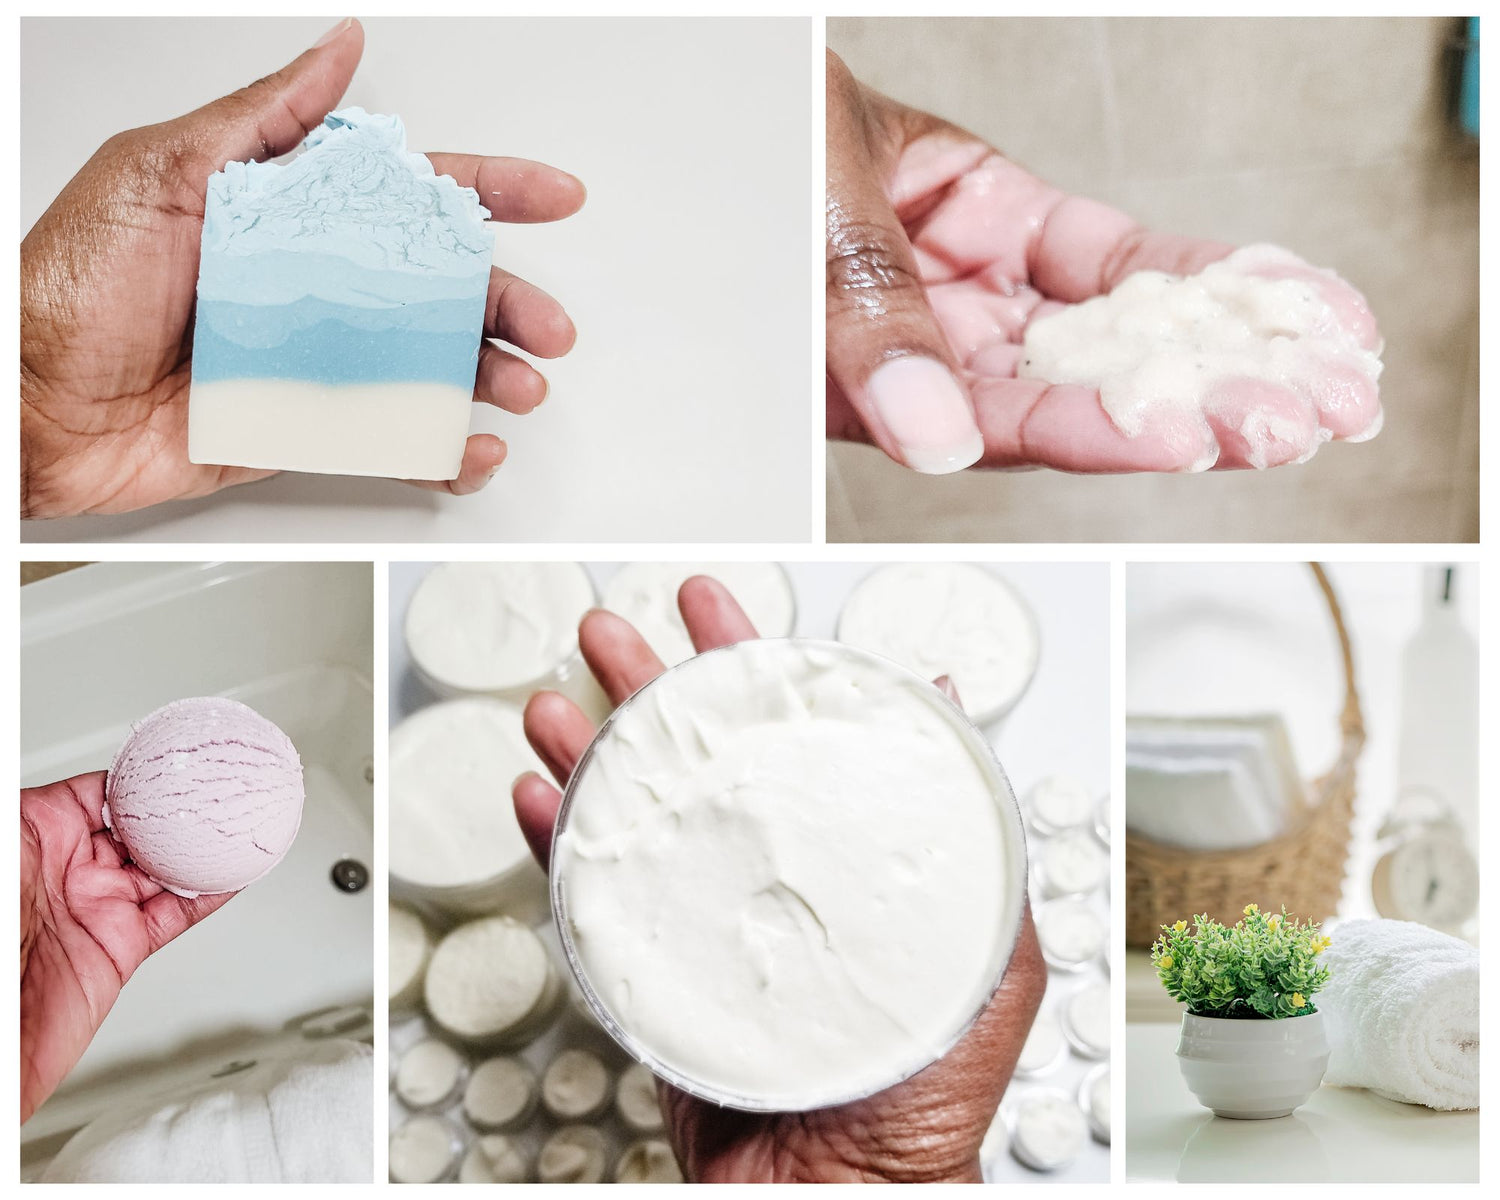 Handmade soap, whipped body butters, whipped sugar scrubs, bubble scoops, and whipped soap handmade